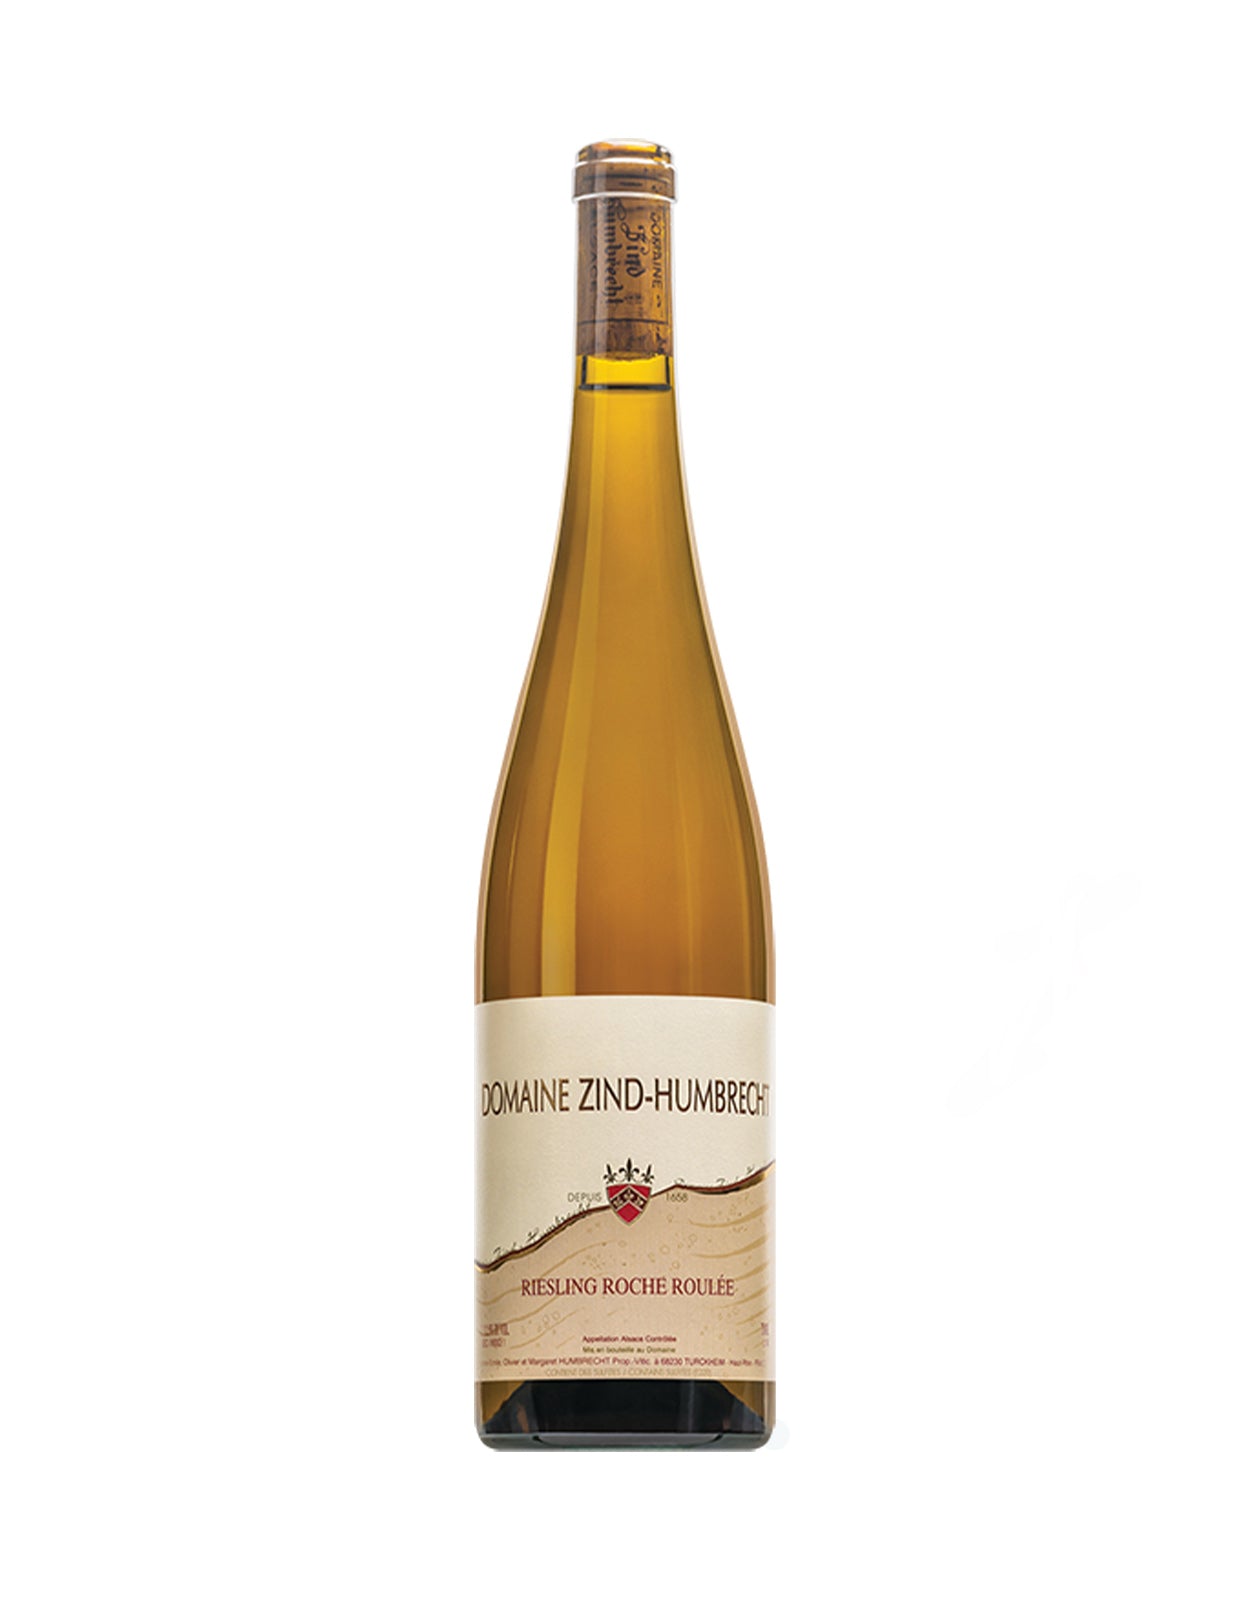 Domaine Zind Humbrecht Riesling Roche Roulee 2021